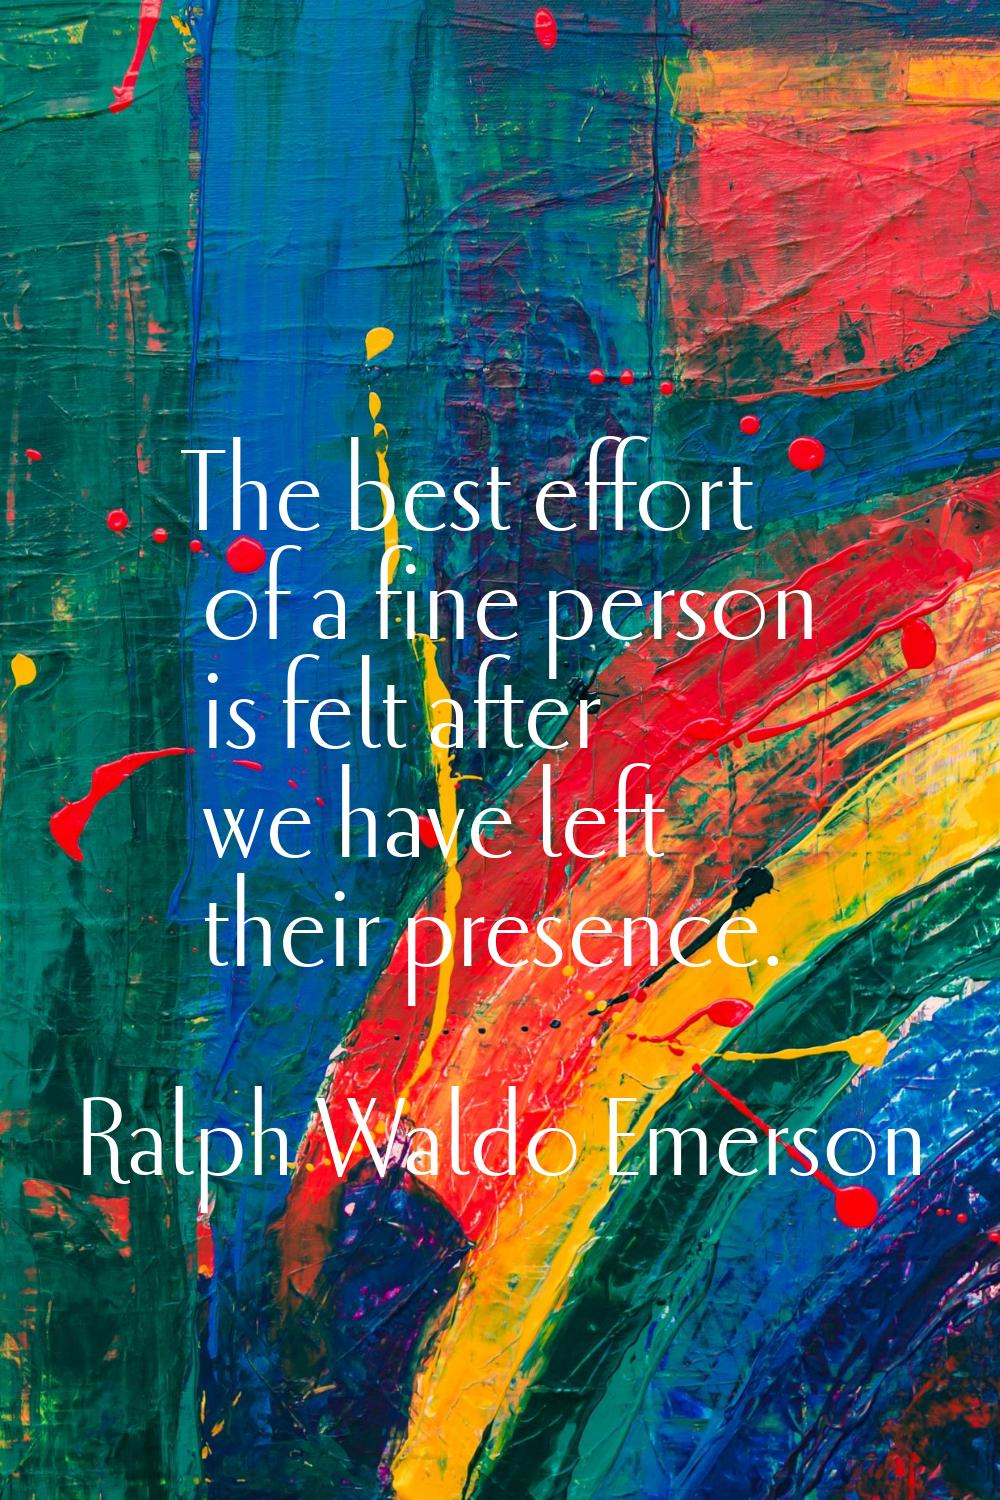 The best effort of a fine person is felt after we have left their presence.